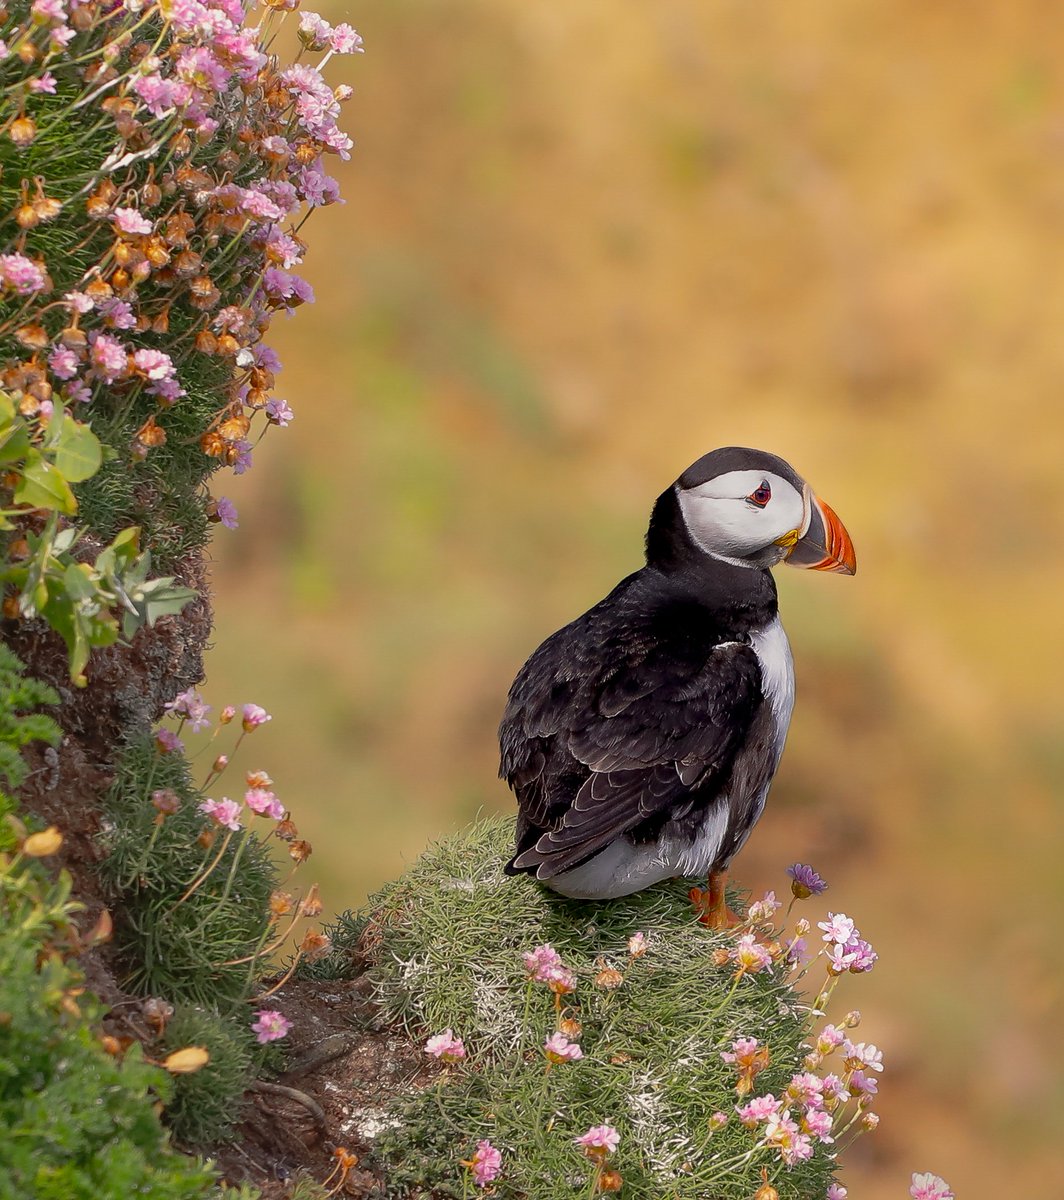 Puffington Post

Is it nearly May yet??

#puffin #salteeislands #wexford #ireland #NaturePhotography #wildlifephotography #birdphotography #birder